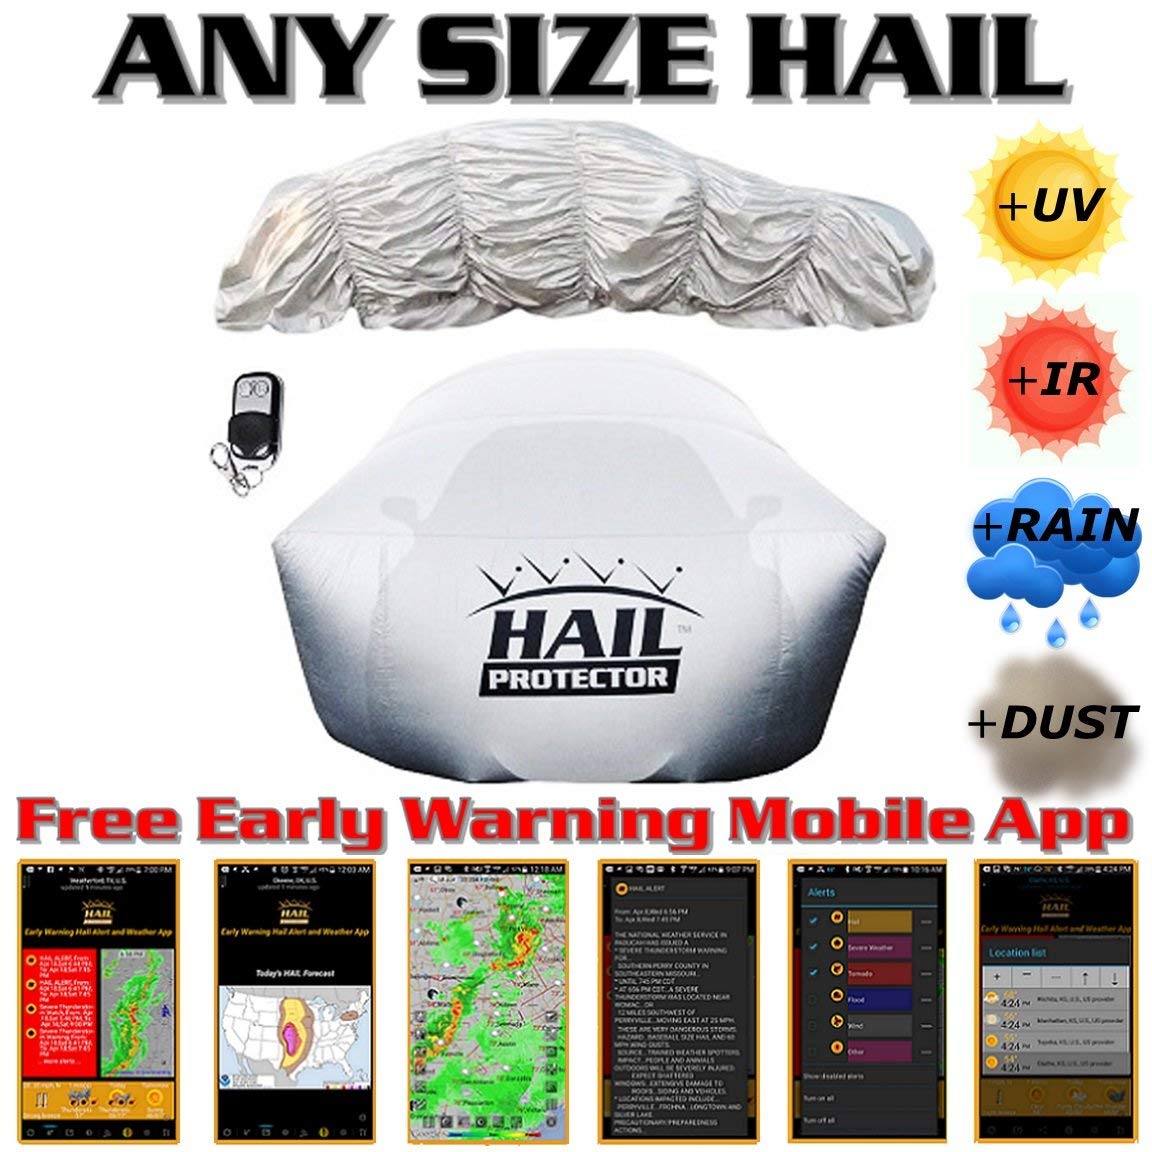 Hail Protector Patented Portable Car Cover System (ANY SIZE HAIL, REMOTE CONTROLLED, FREE MOBILE APP ALERT SUBSCRIPTION) for Sedans, Hatchbacks and Wa 2